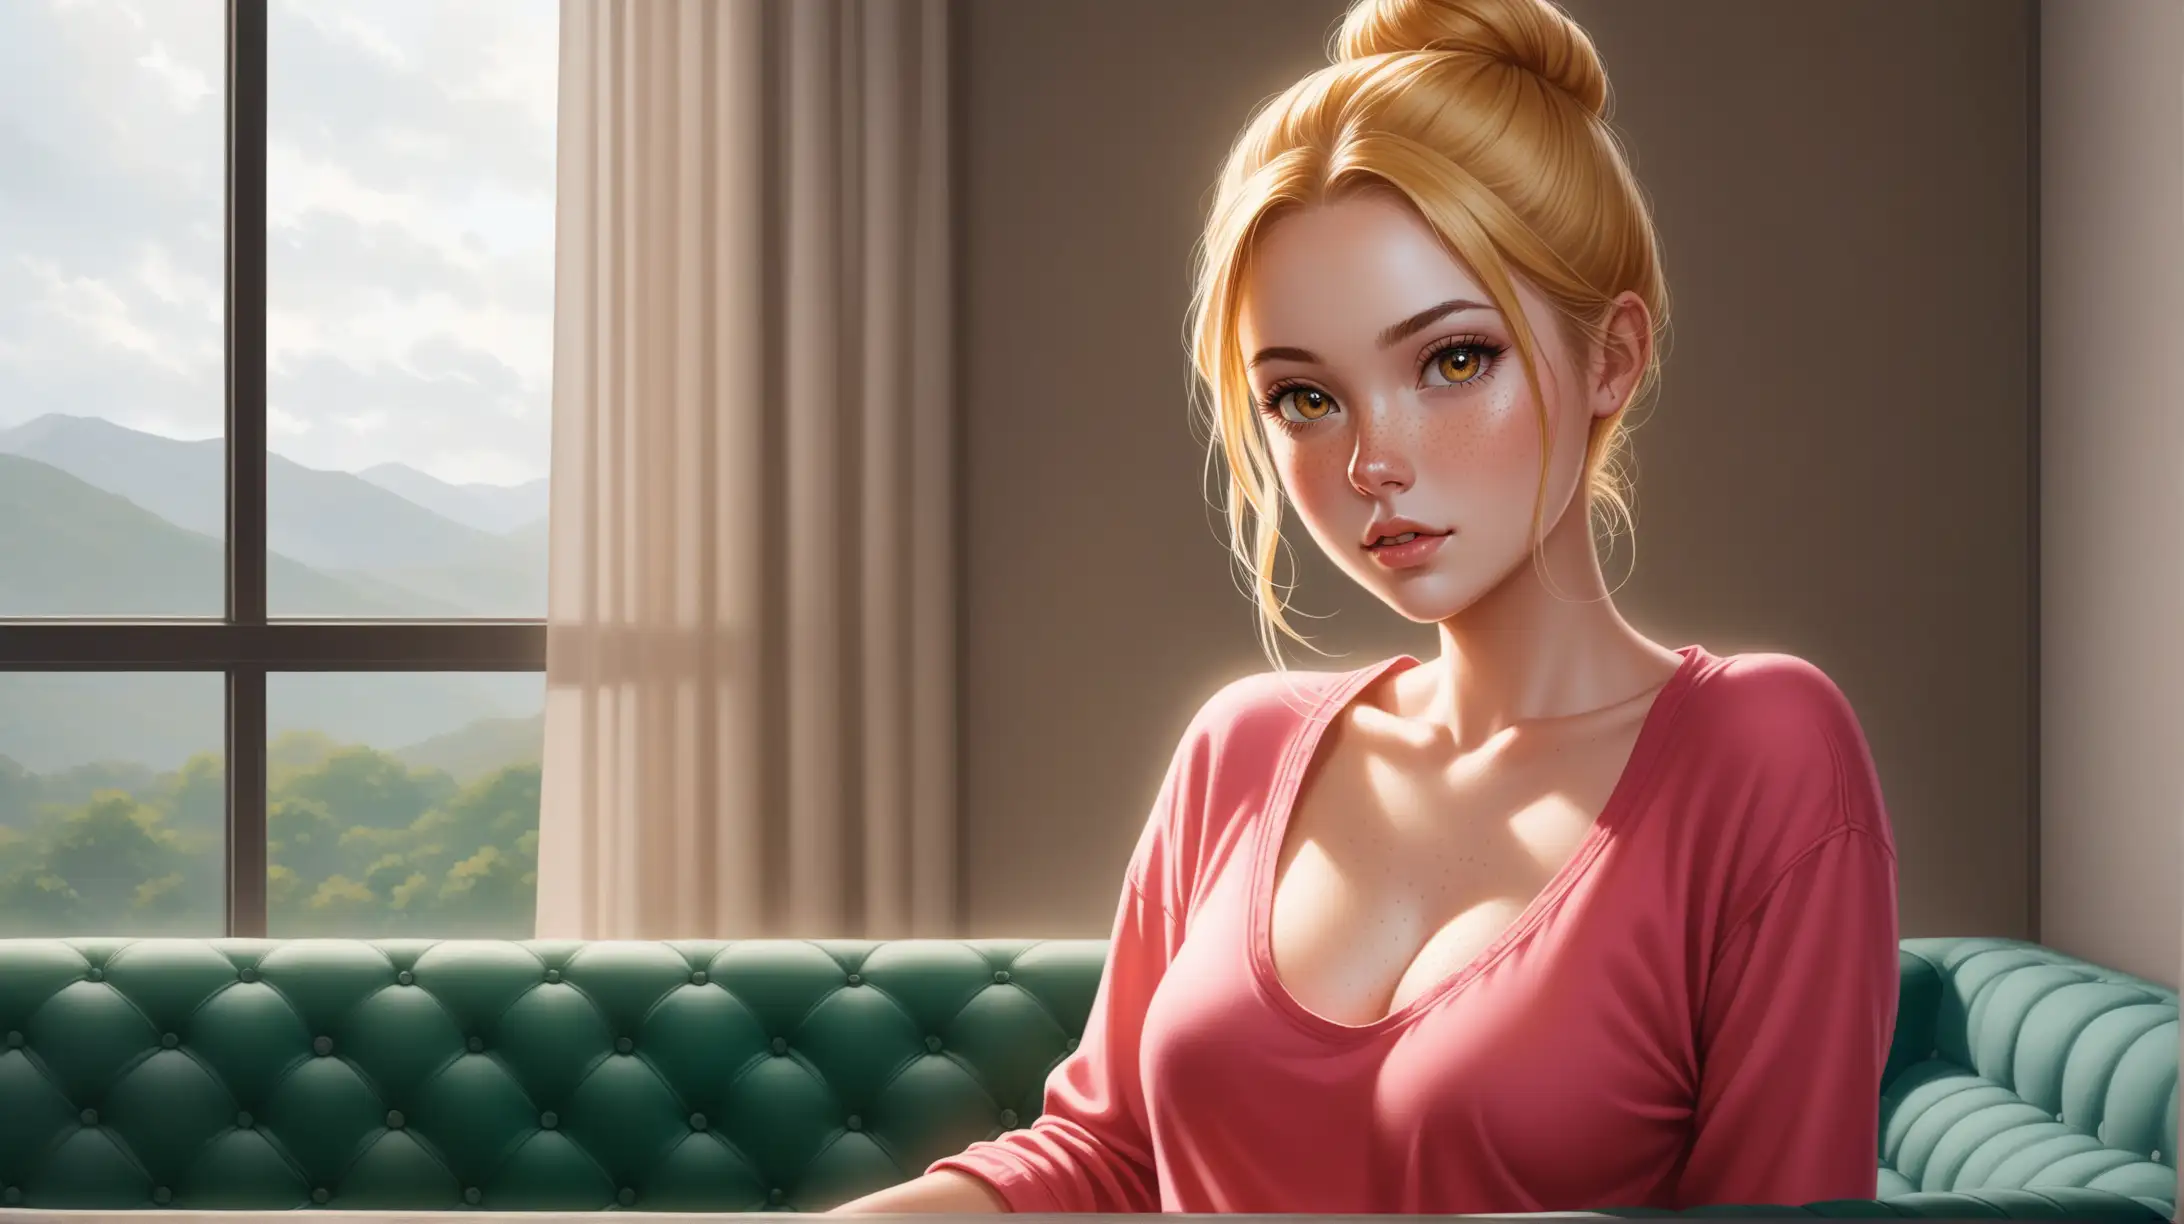 Draw a woman, long blonde hair in a bun, gold eyes, freckles, perky body, high quality, realistic, long shot, indoors, sofa, sitting, overcast lighting, colorful casual outfit, seductive, loving gaze toward the viewer